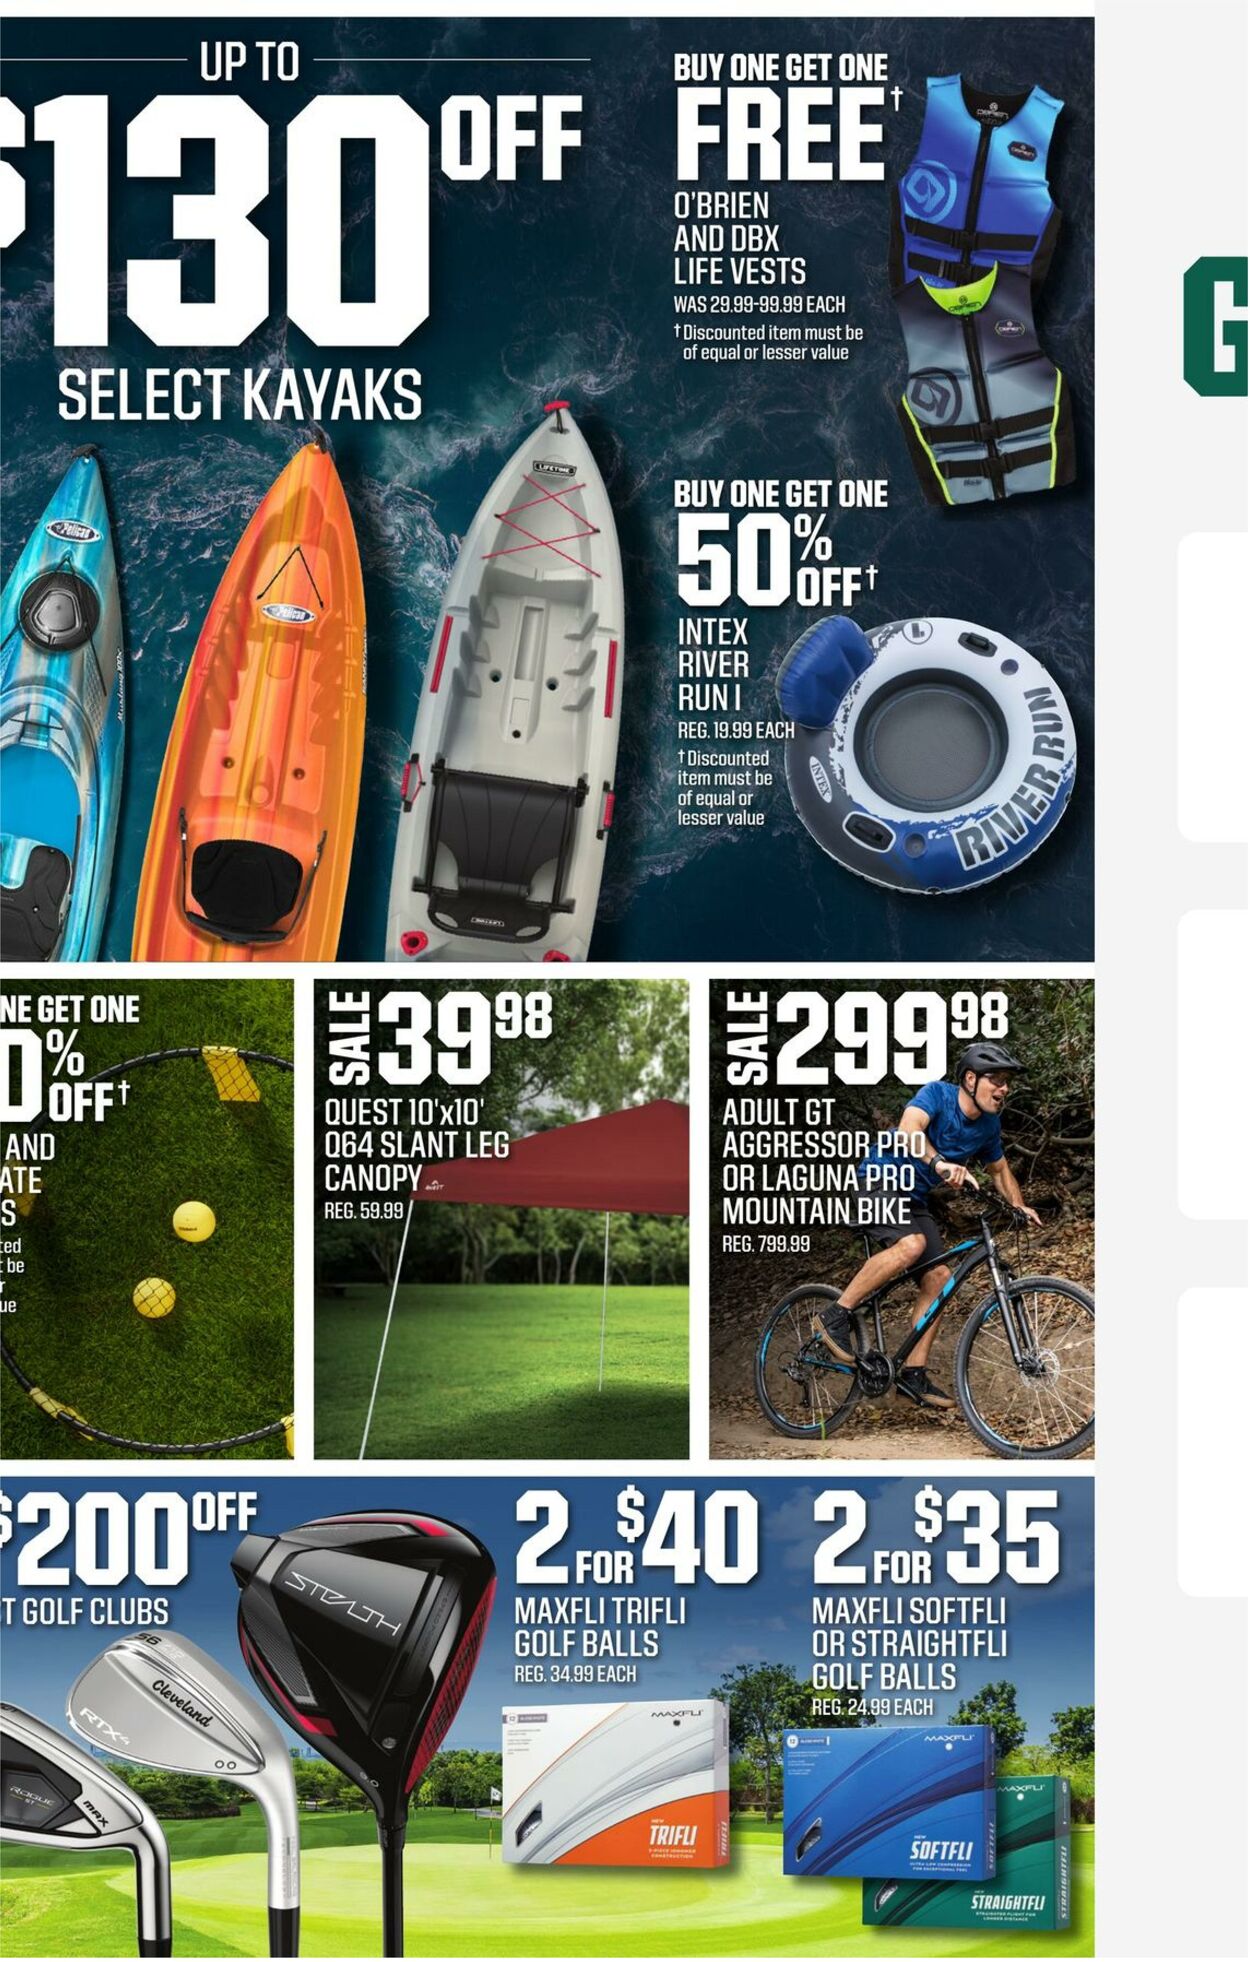 Weekly ad Dick's Sporting Goods 06/25/2023 - 07/01/2023